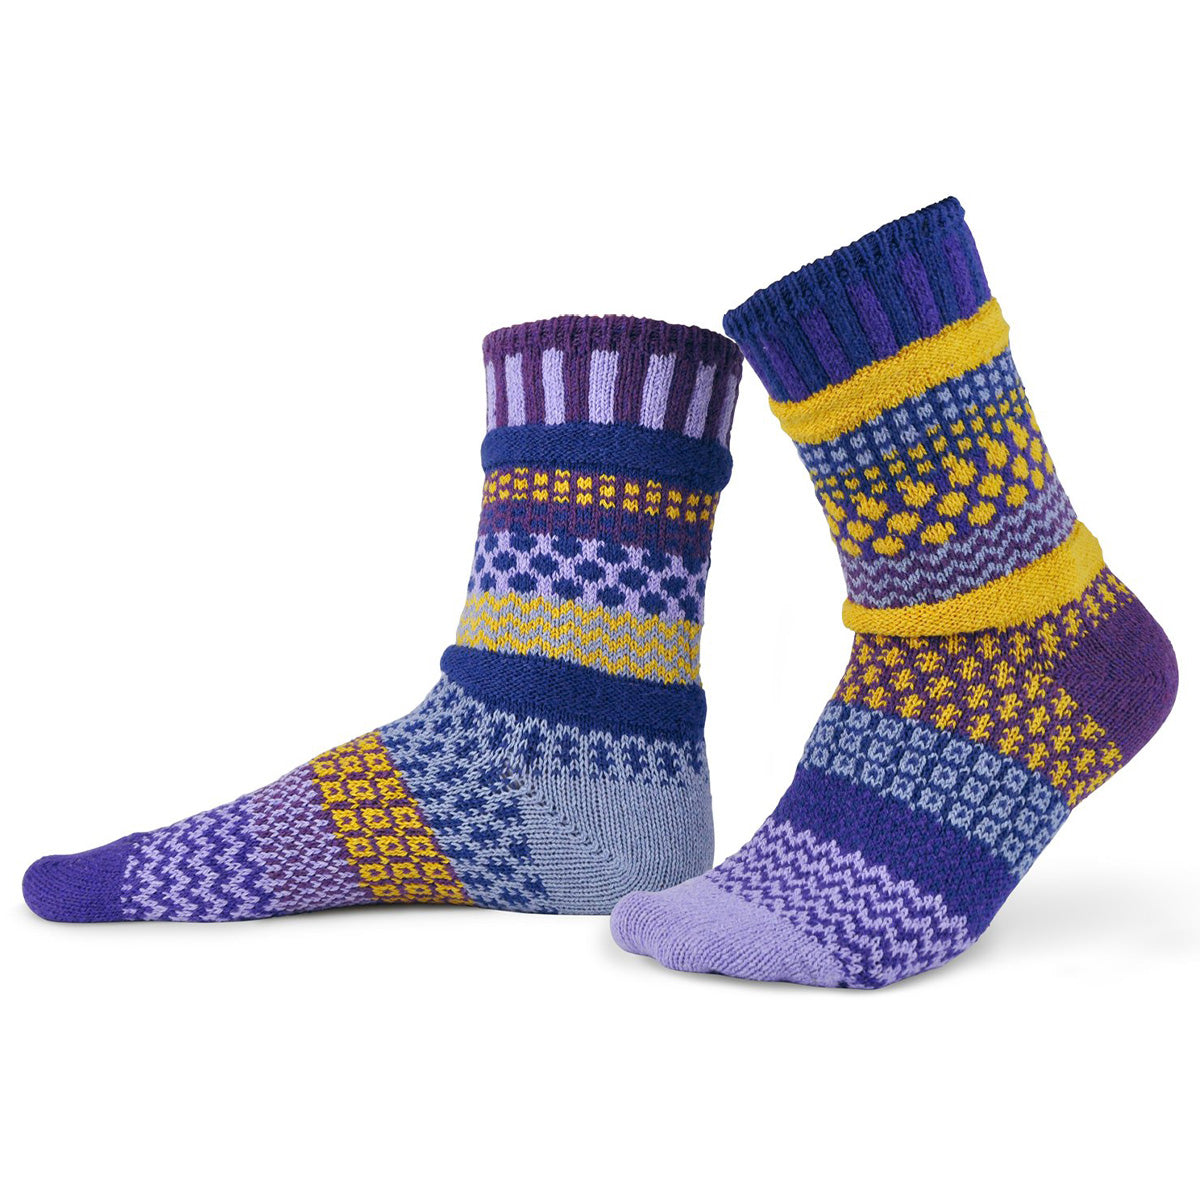 Mismatched socks feature funky patterns in bands of purples and yellows!